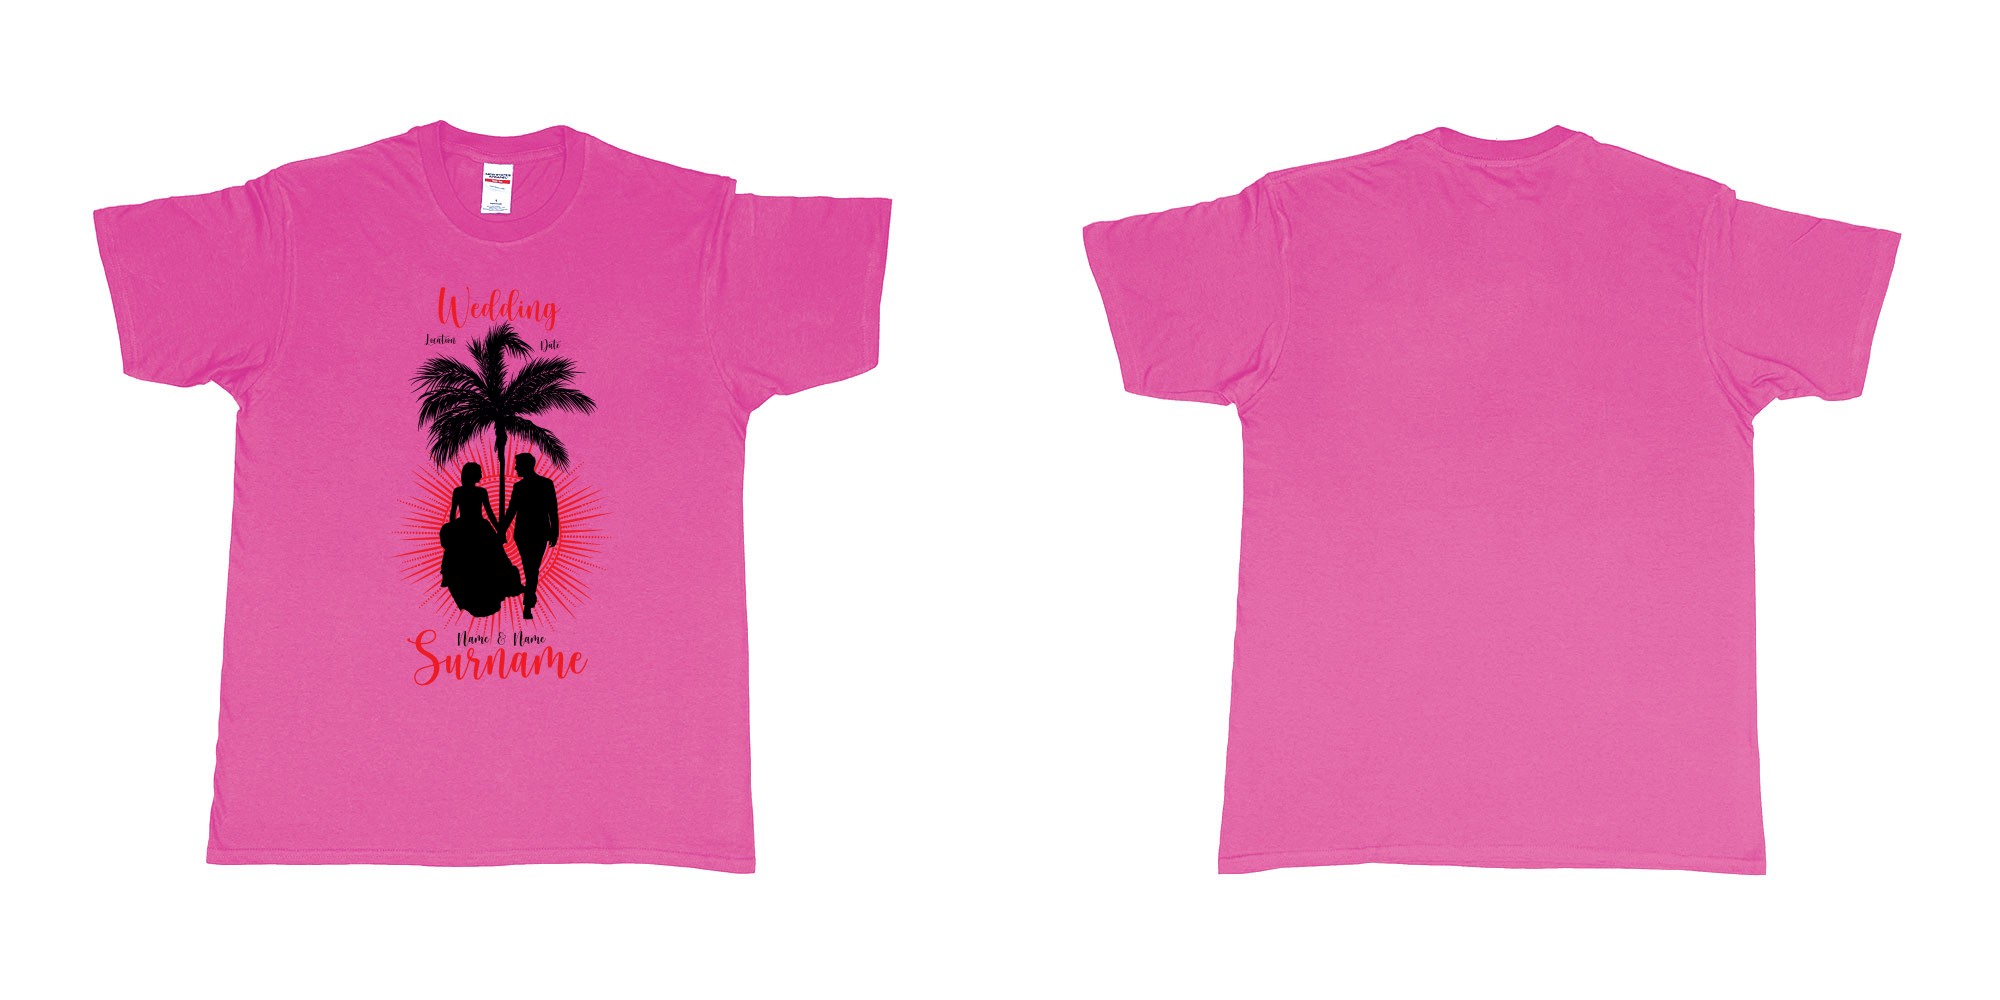 Custom tshirt design wedding palm sun bali in fabric color heliconia choice your own text made in Bali by The Pirate Way